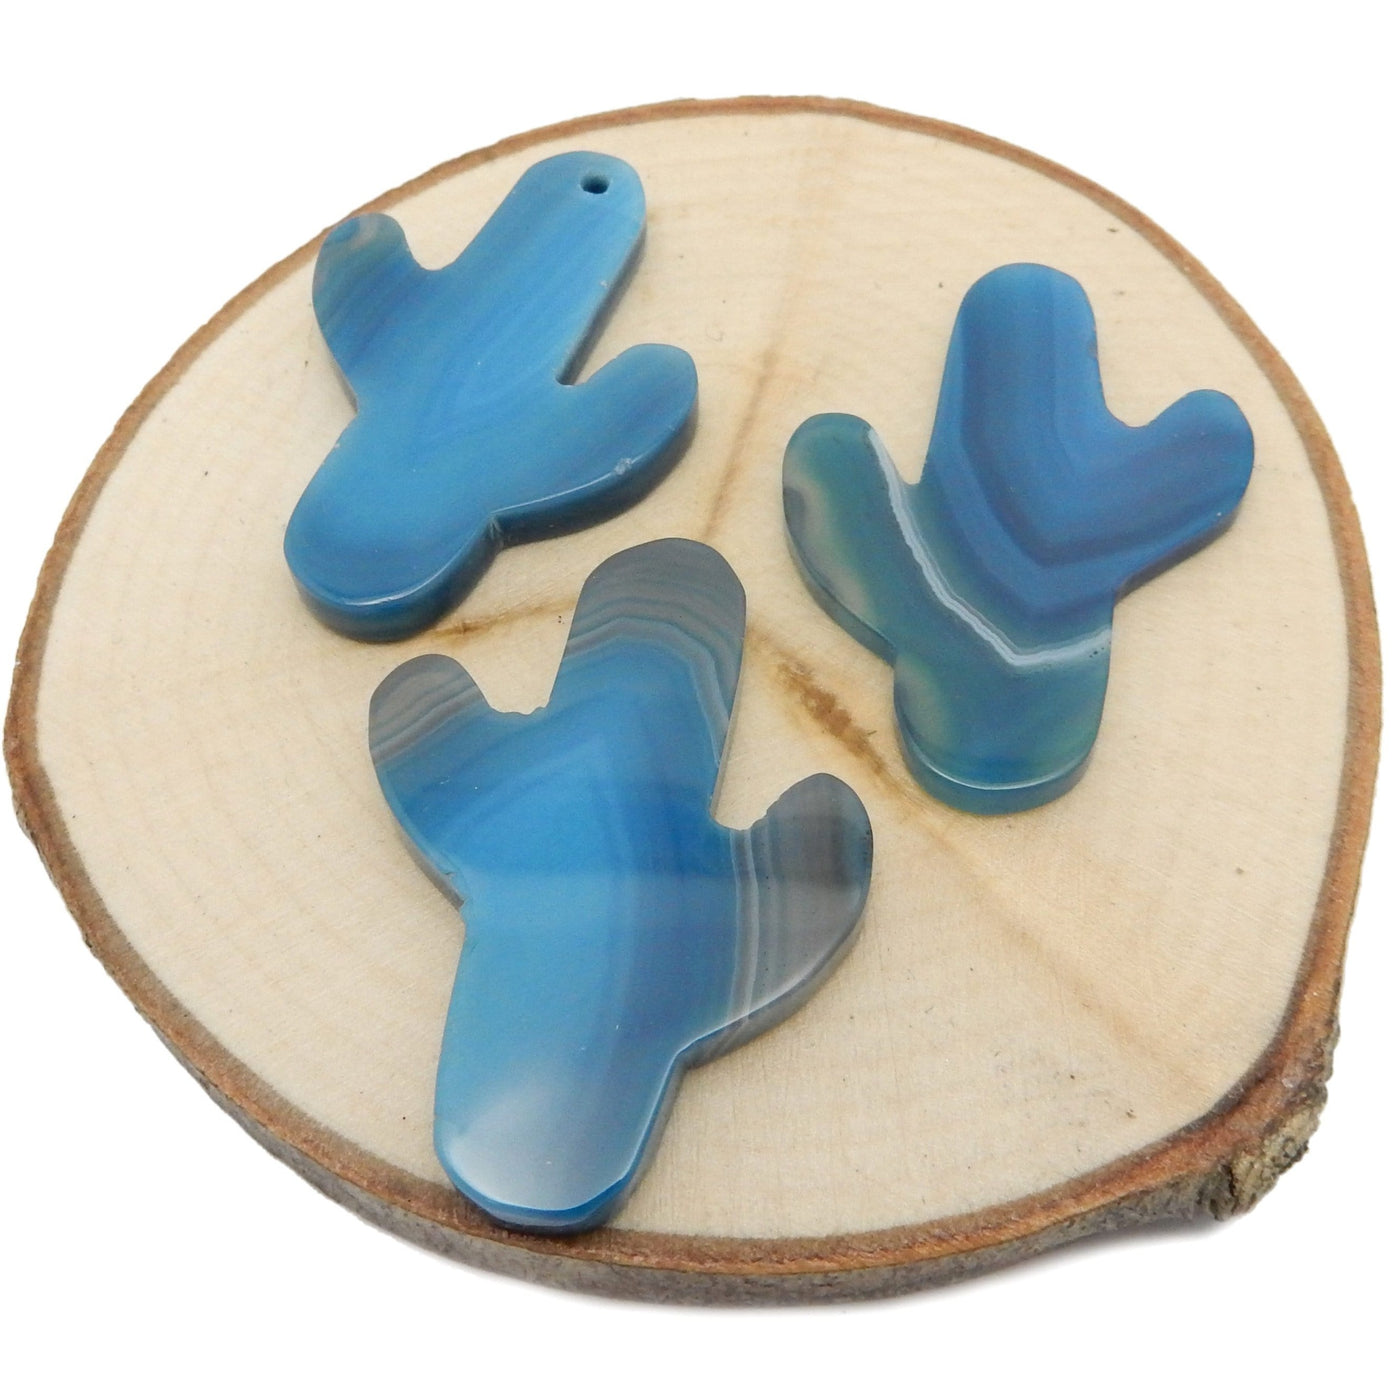 This picture is showing 3 of our blue cactus agates, being displayed on a wooden platform.